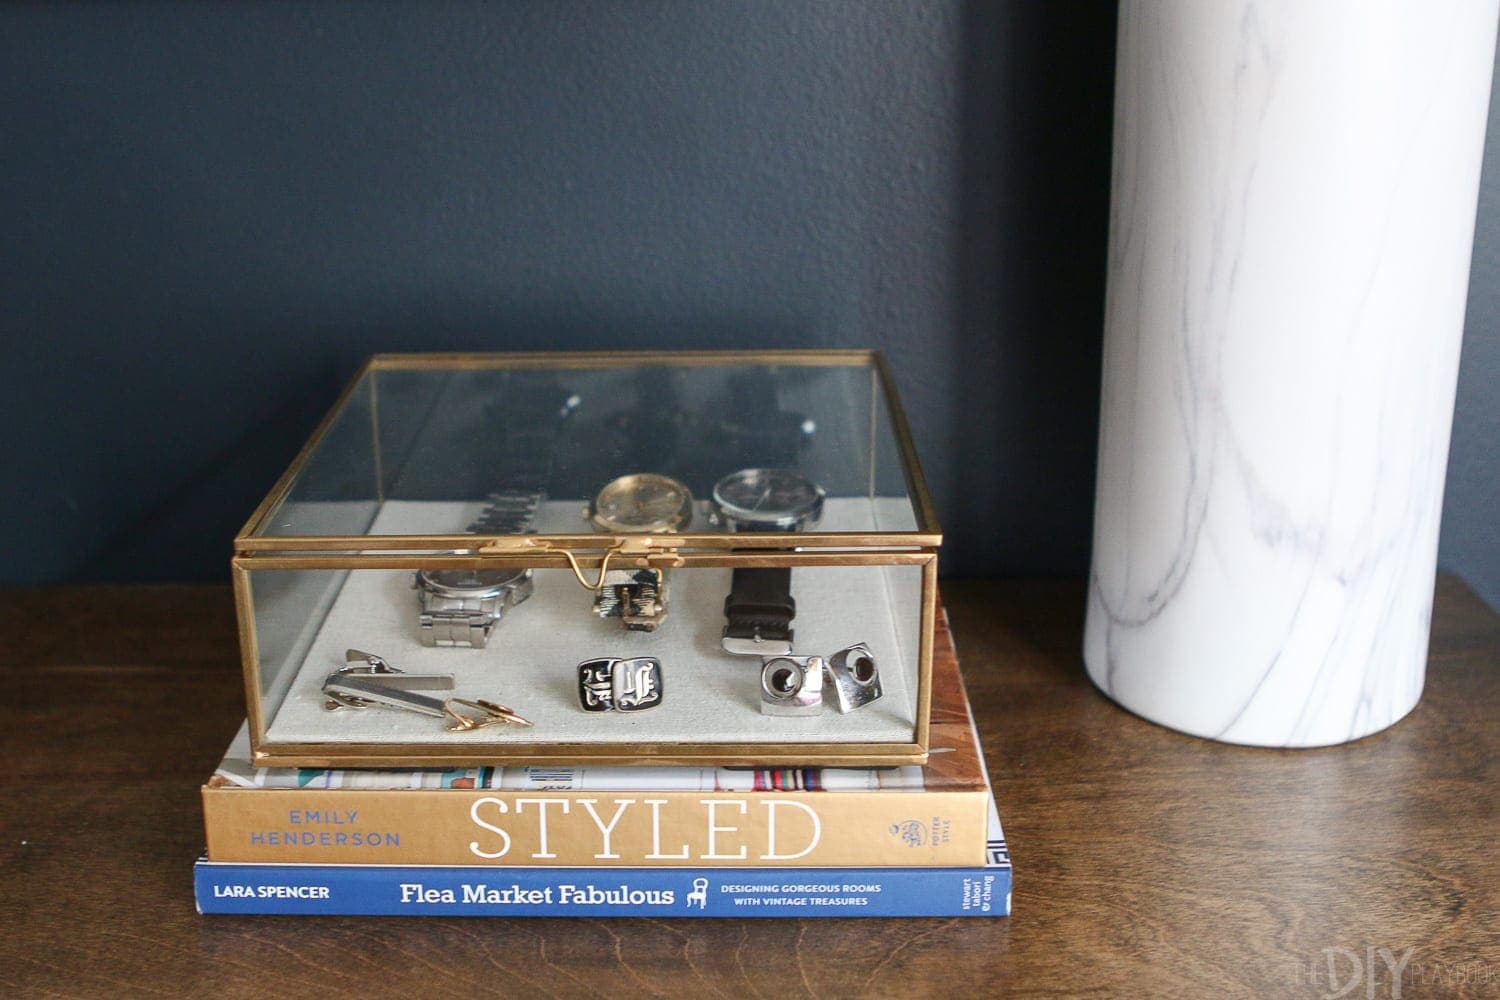 Sleek bedside table display box for watches, cufflinks, and personal accessories. 